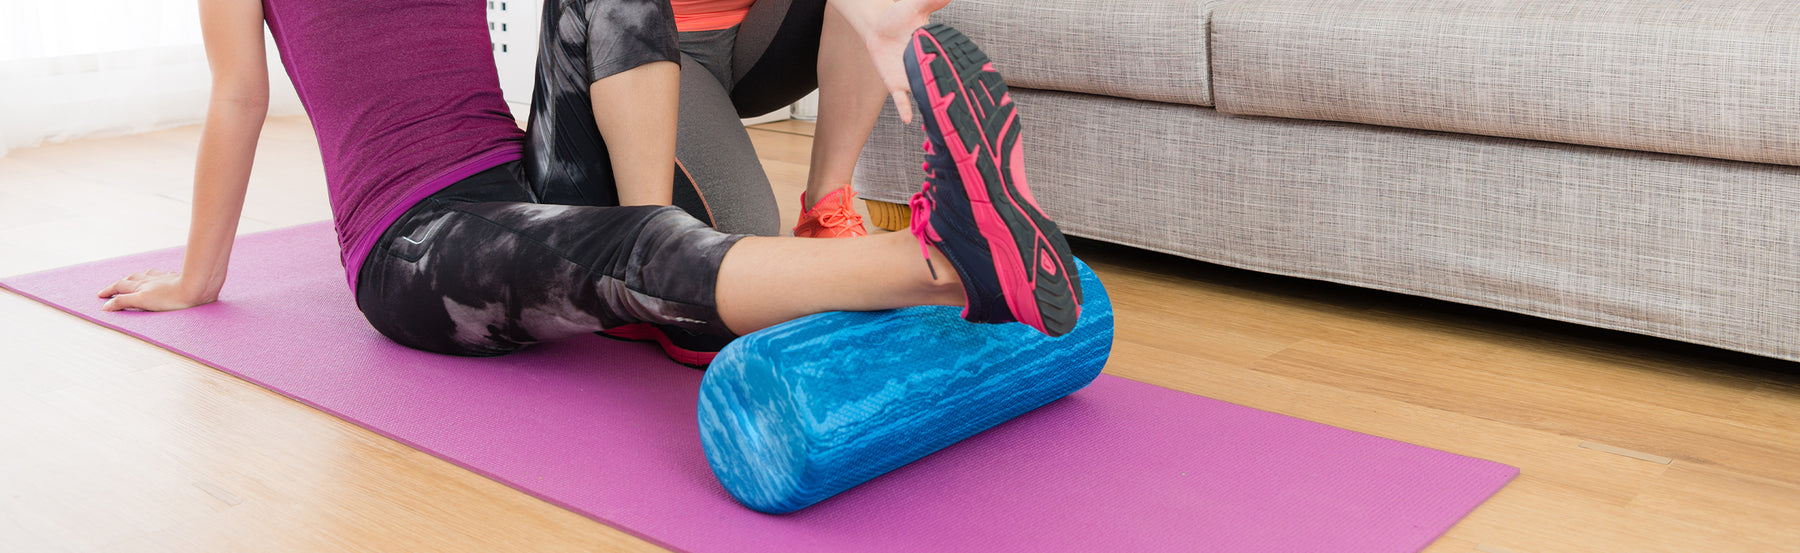 How to Use Foam Rollers to Relieve Pain and Muscle Tension in Your Back and Legs